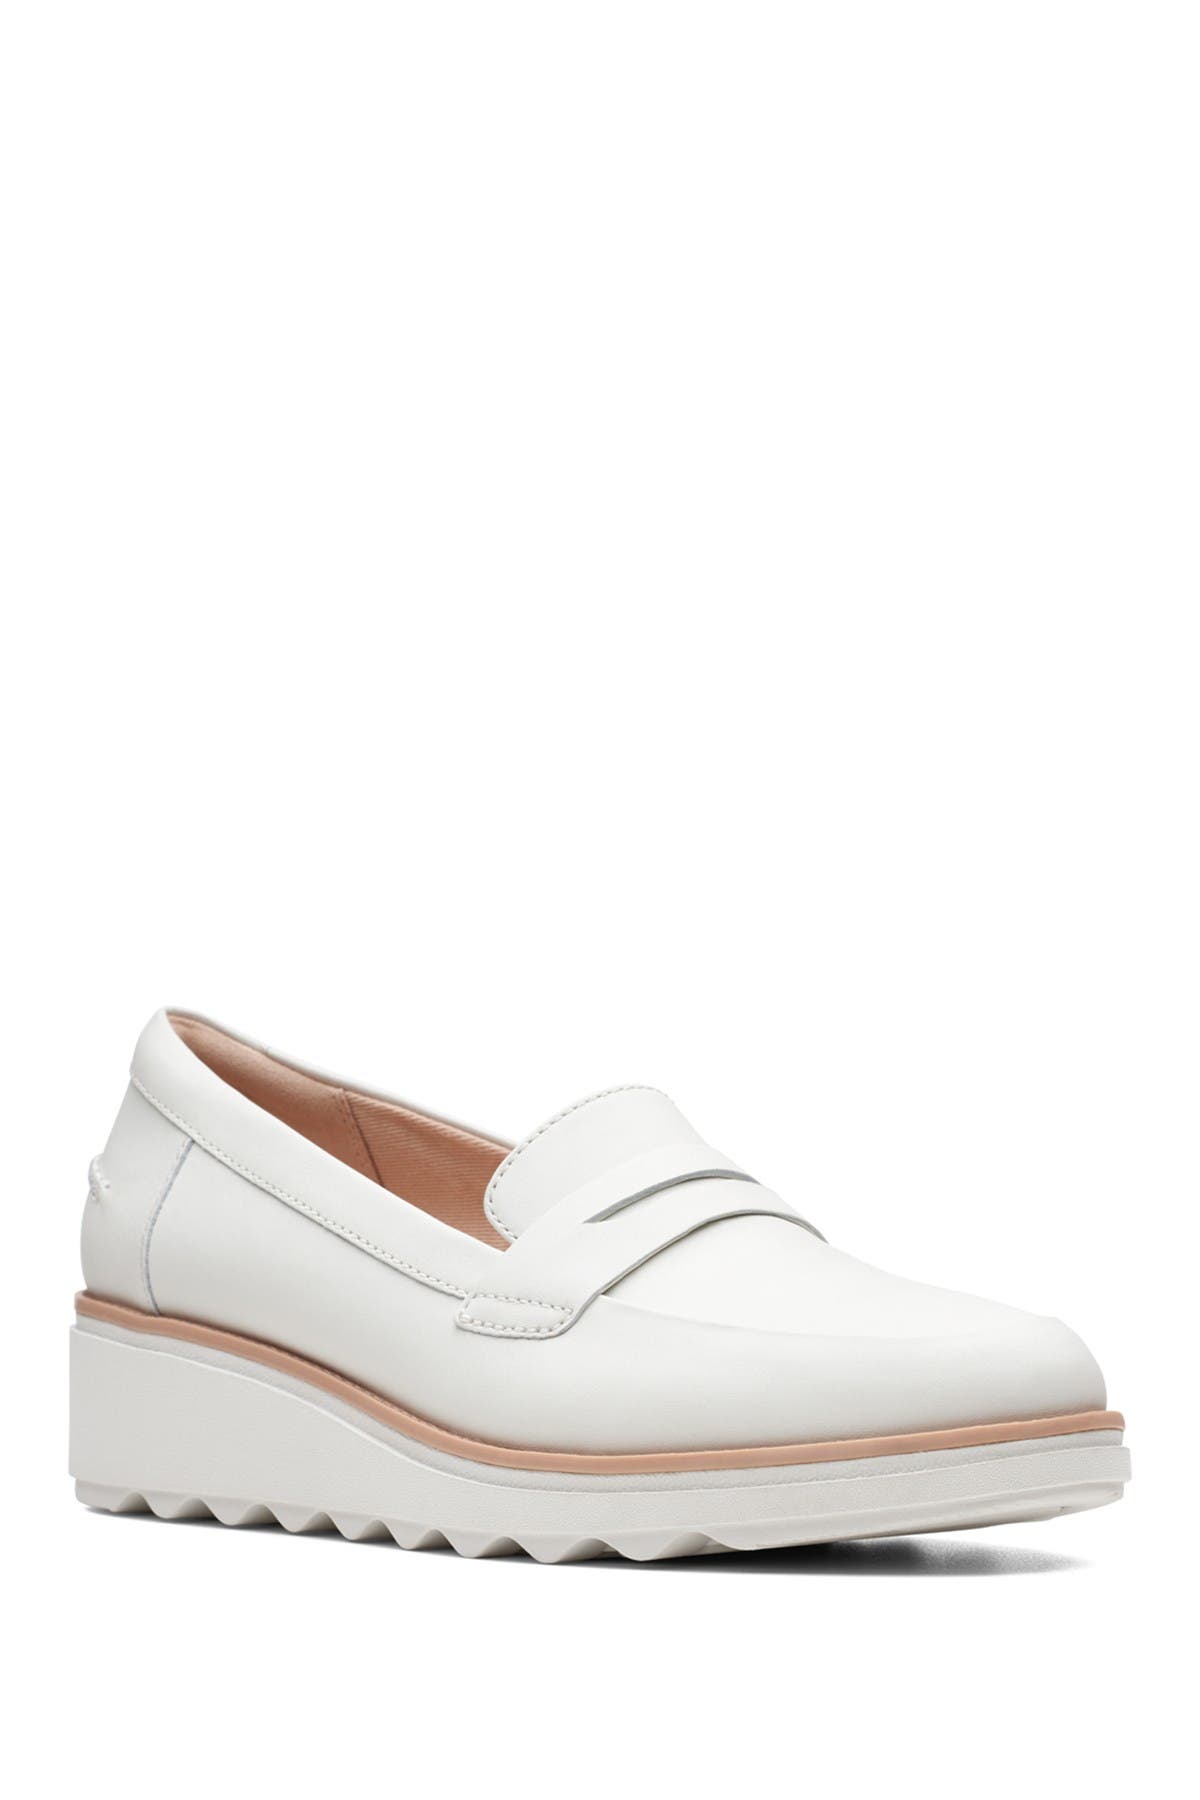 Clarks | Sharon Ranch Wedge Loafer 